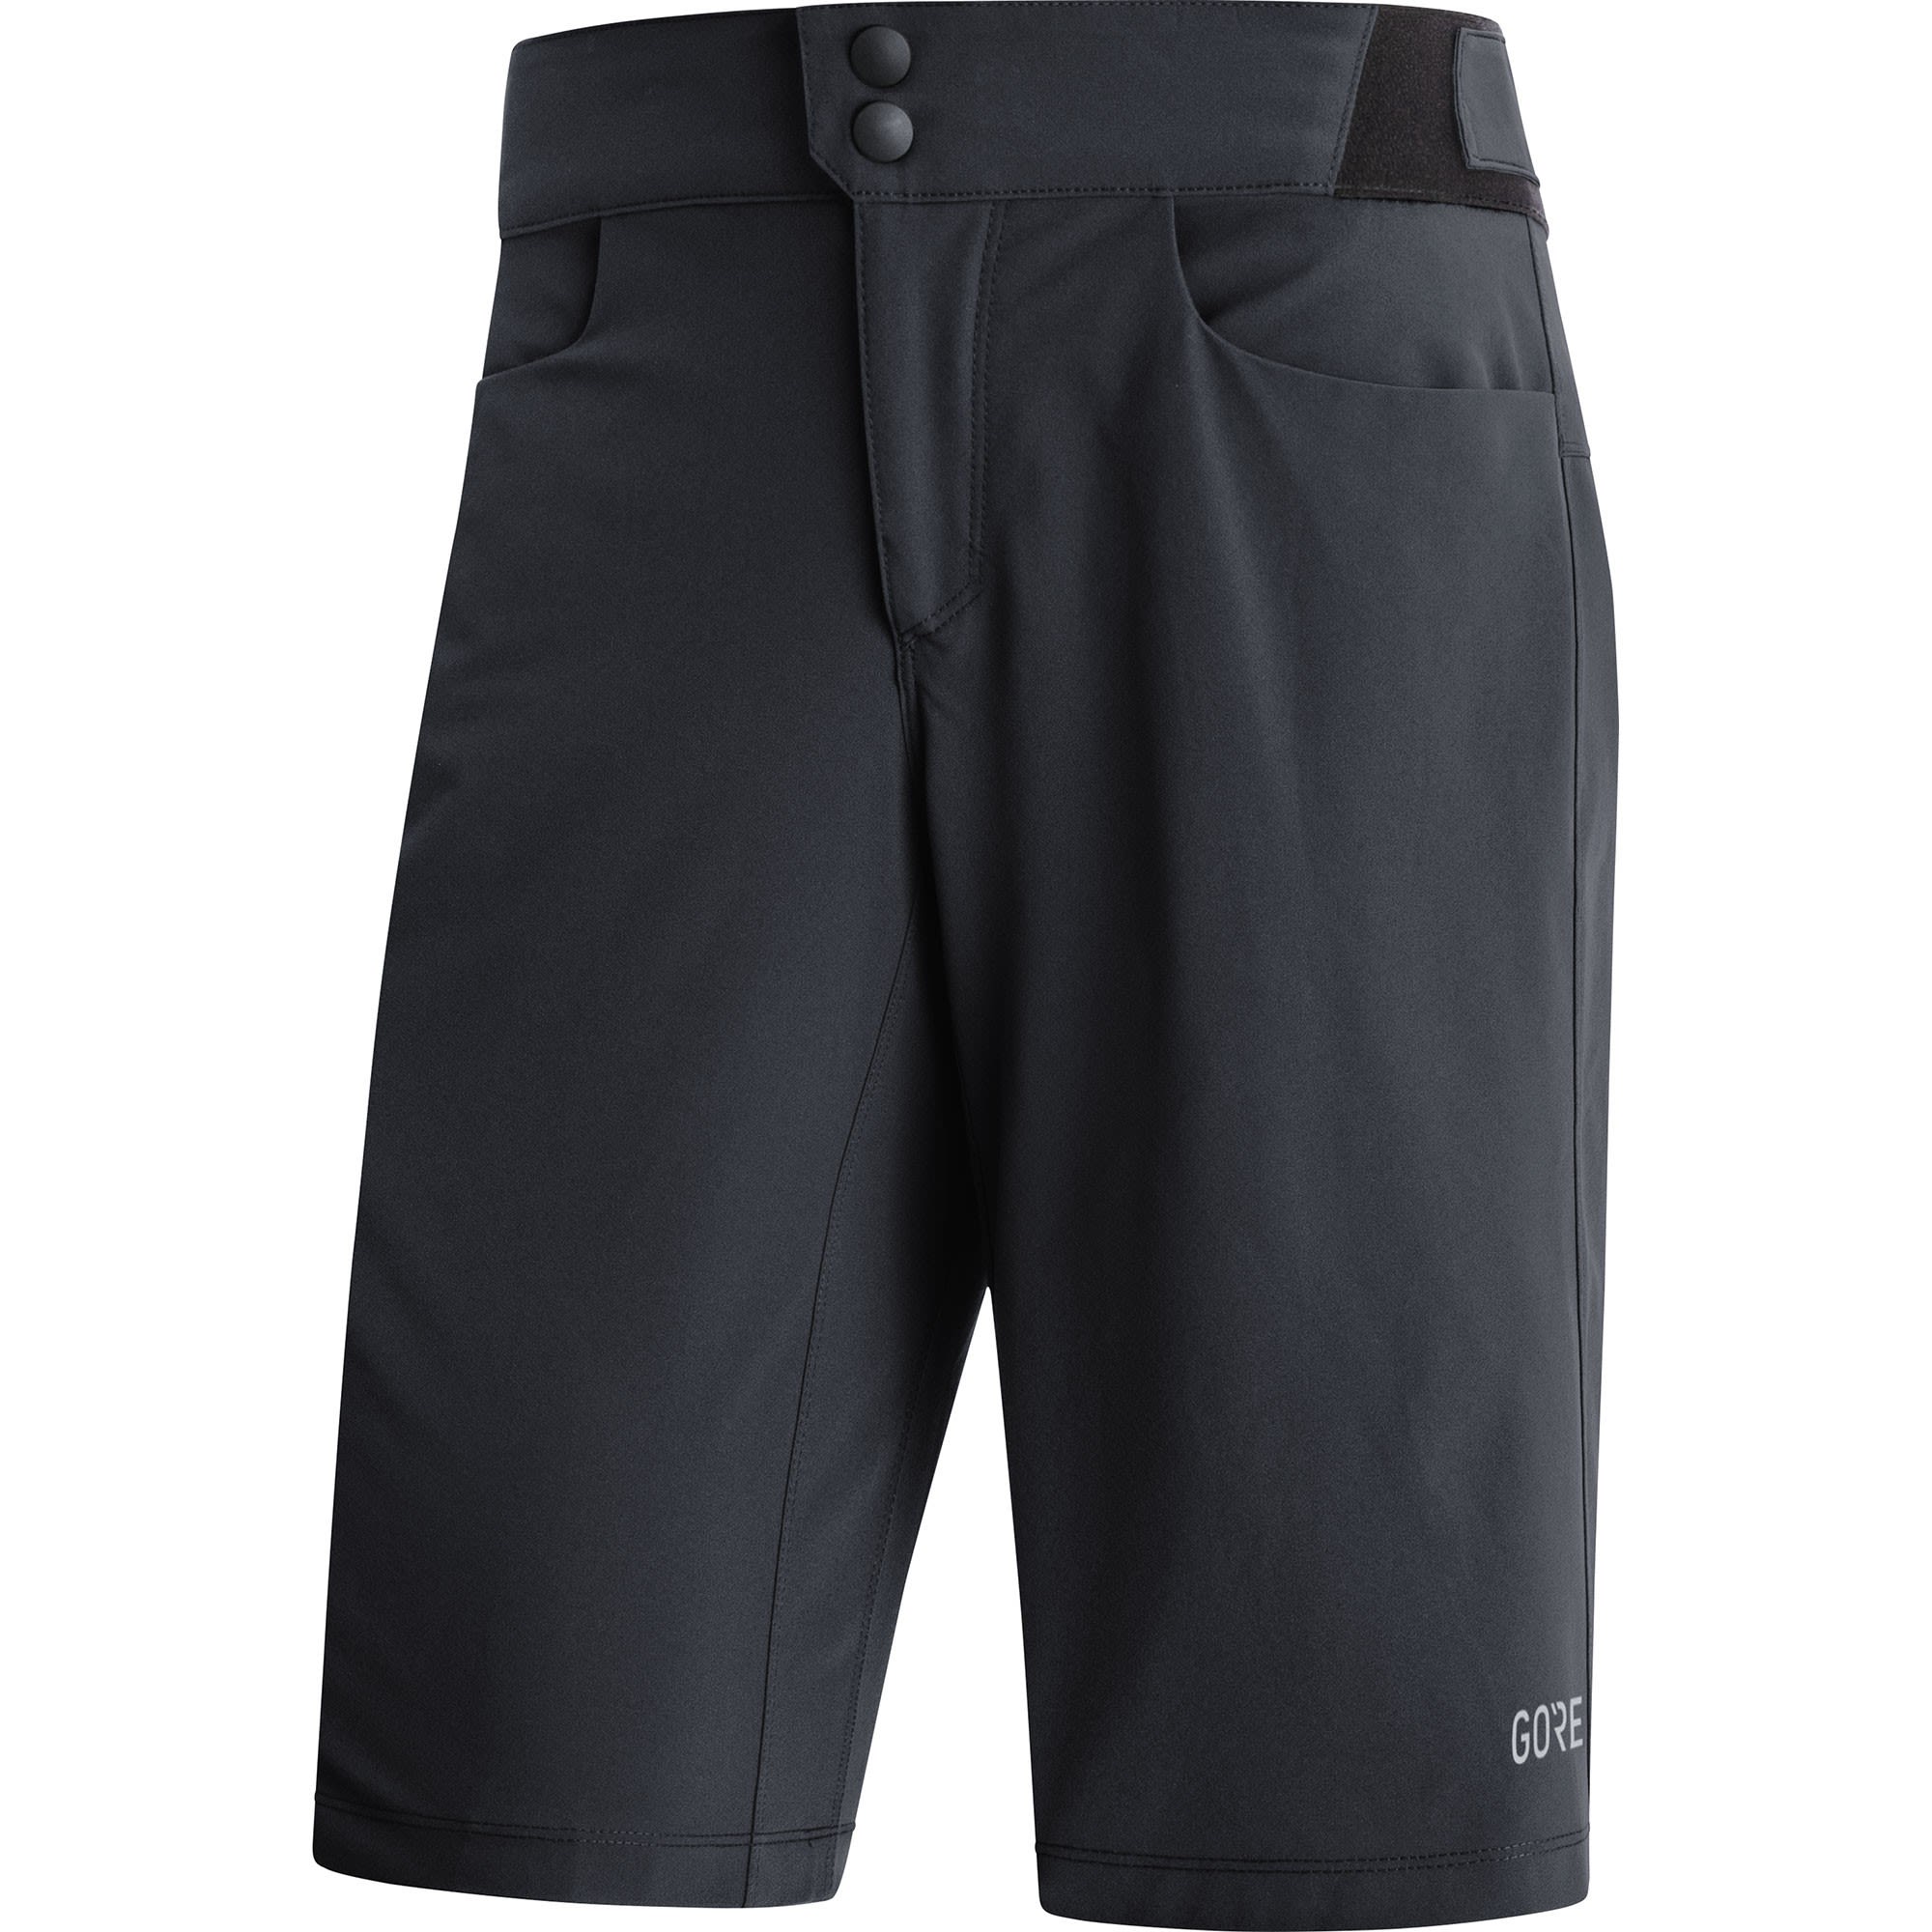 Gore Passion Shorts